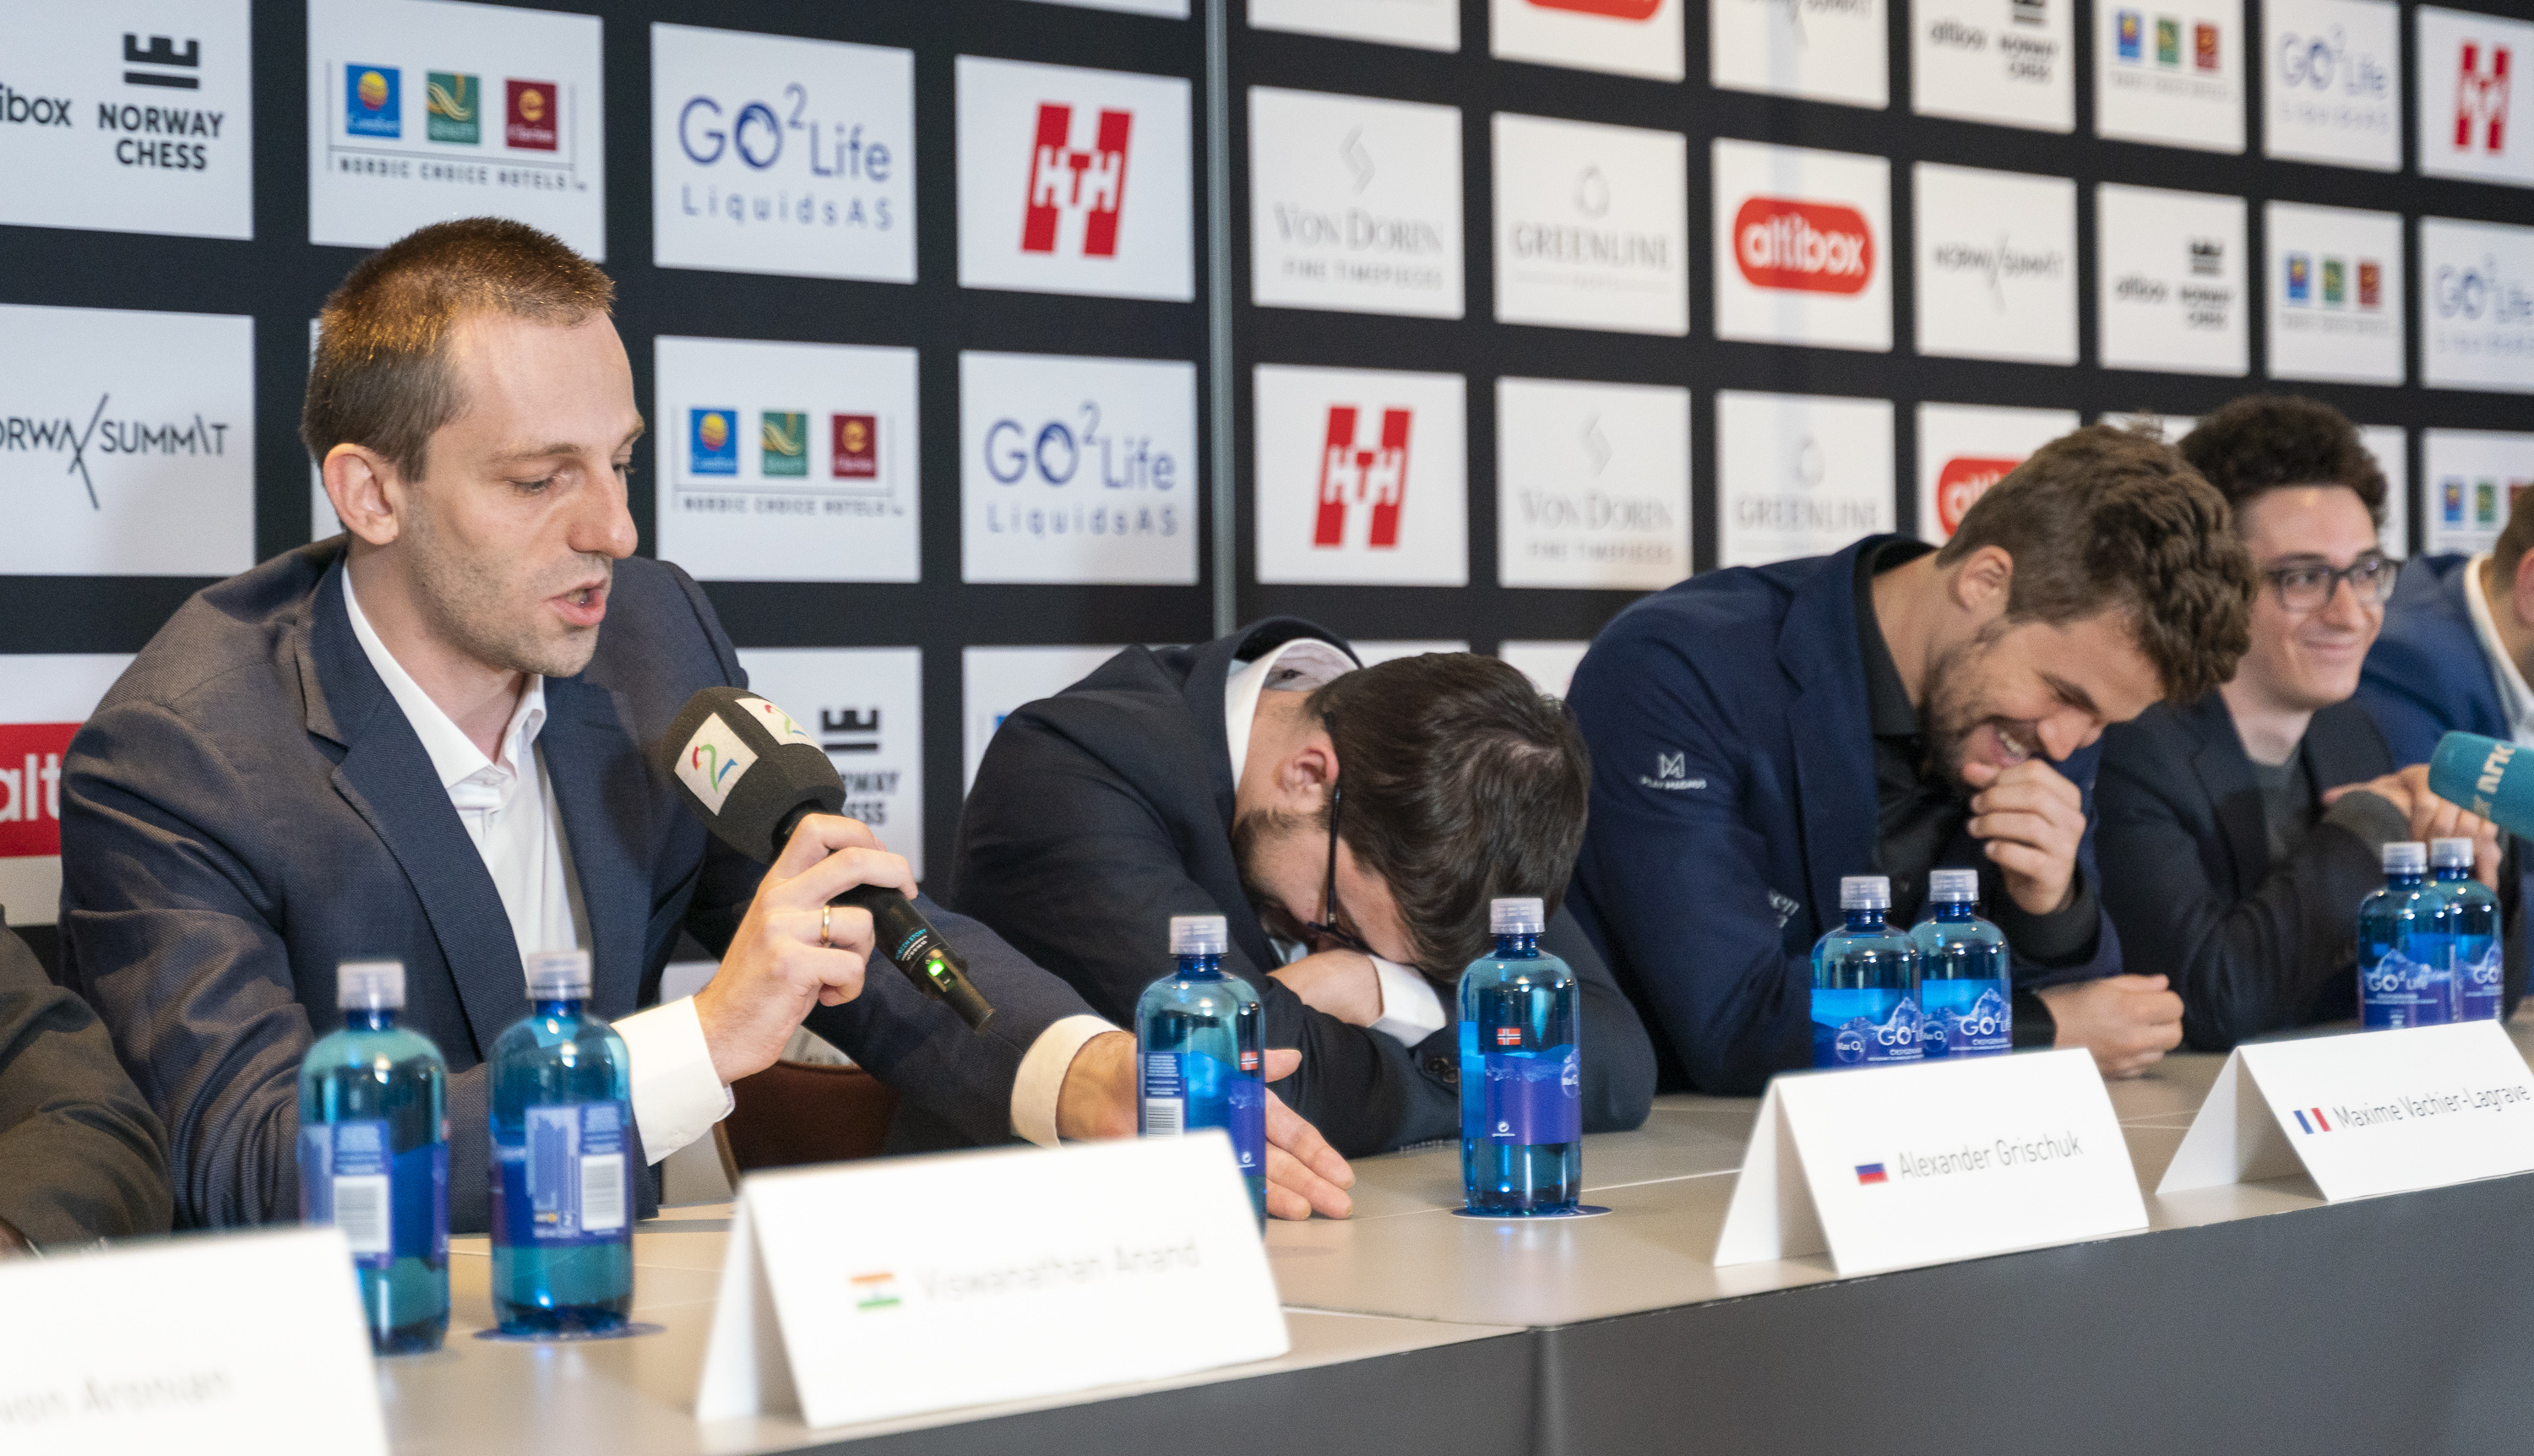 Norway Chess Pressconference and blitz